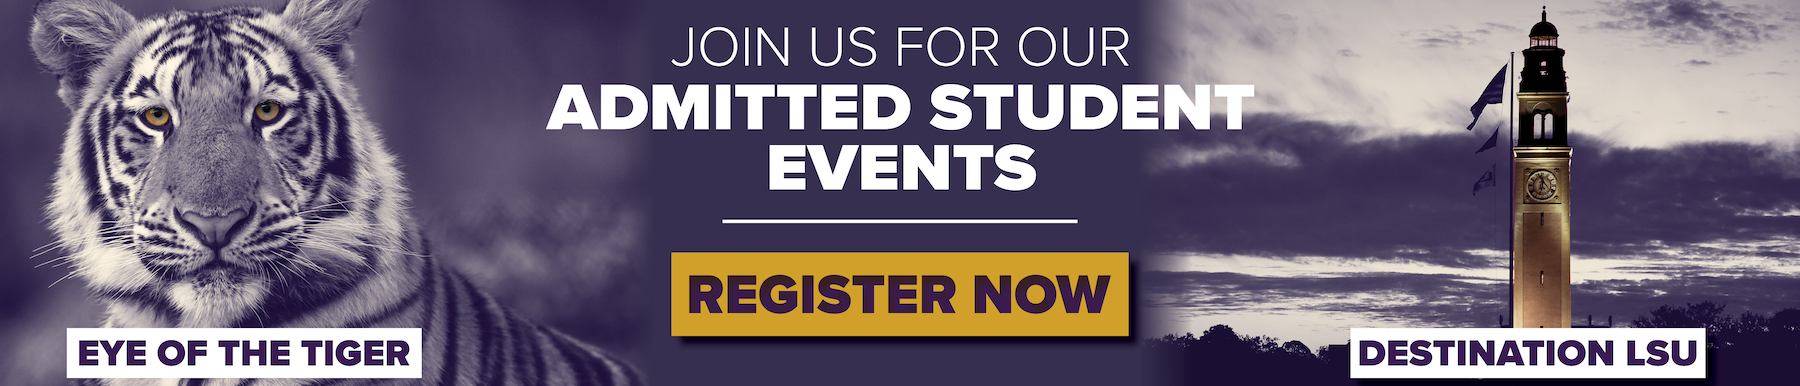 Admitted Student Events